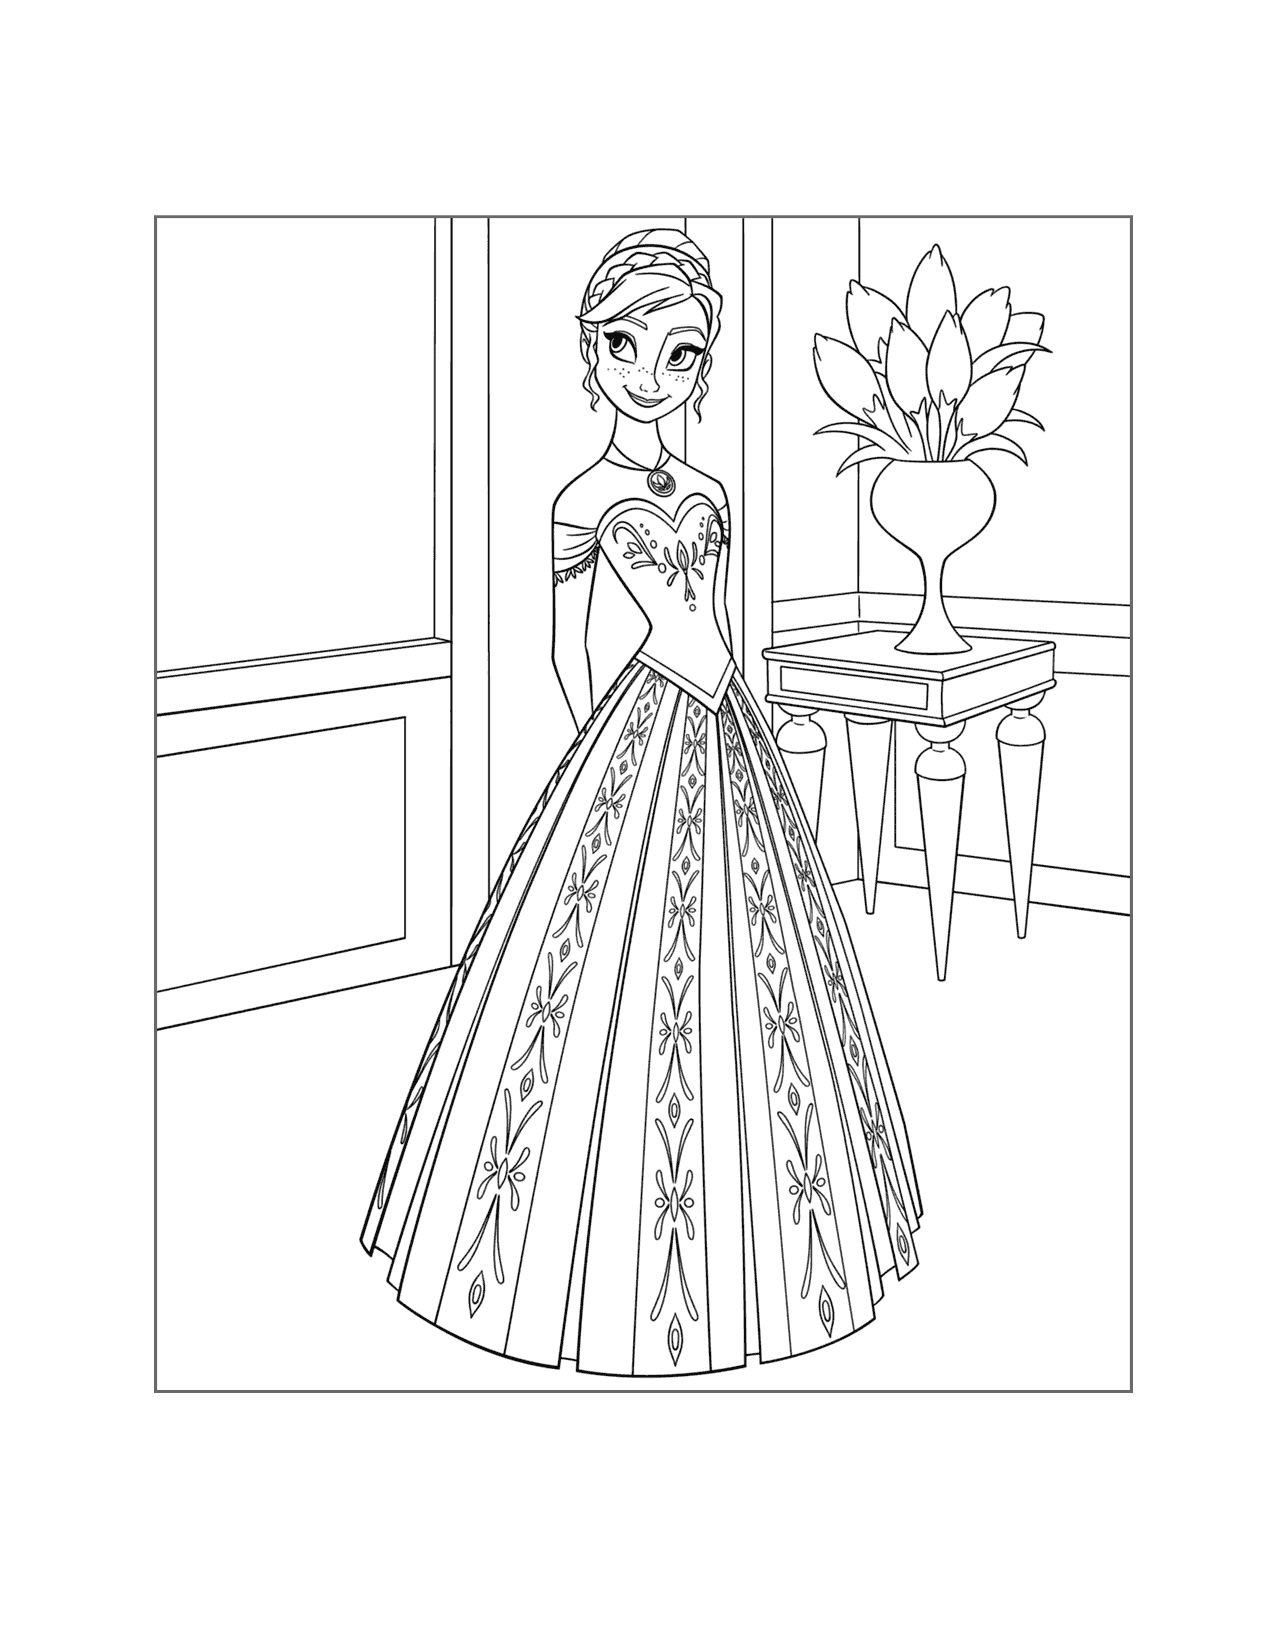 Annas Pretty Dress Coloring Page